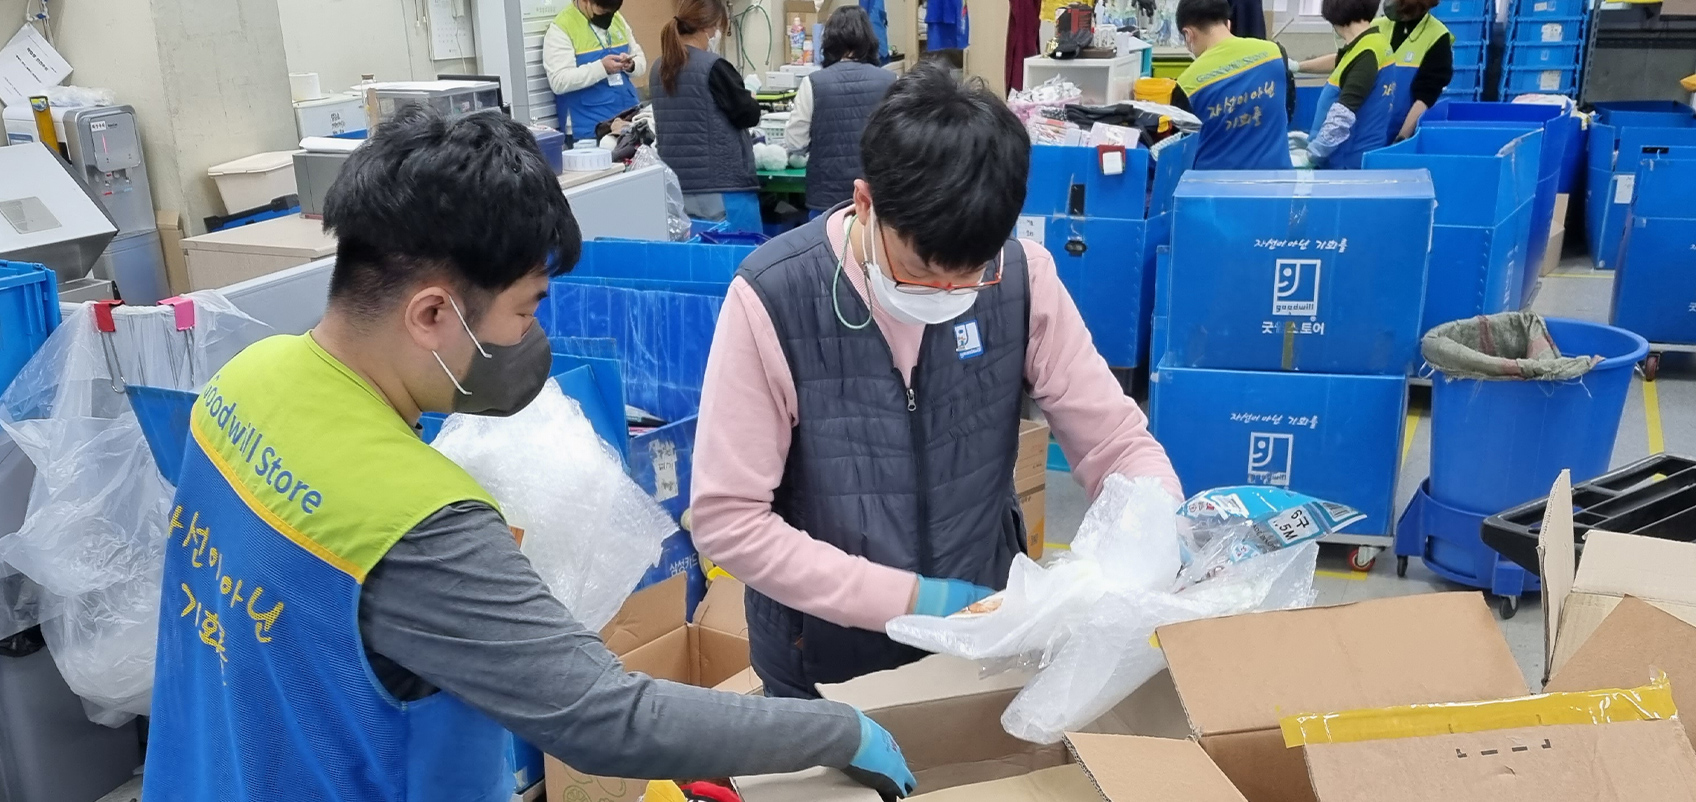 Employees are surrounded by many boxes, sorting through donated goods